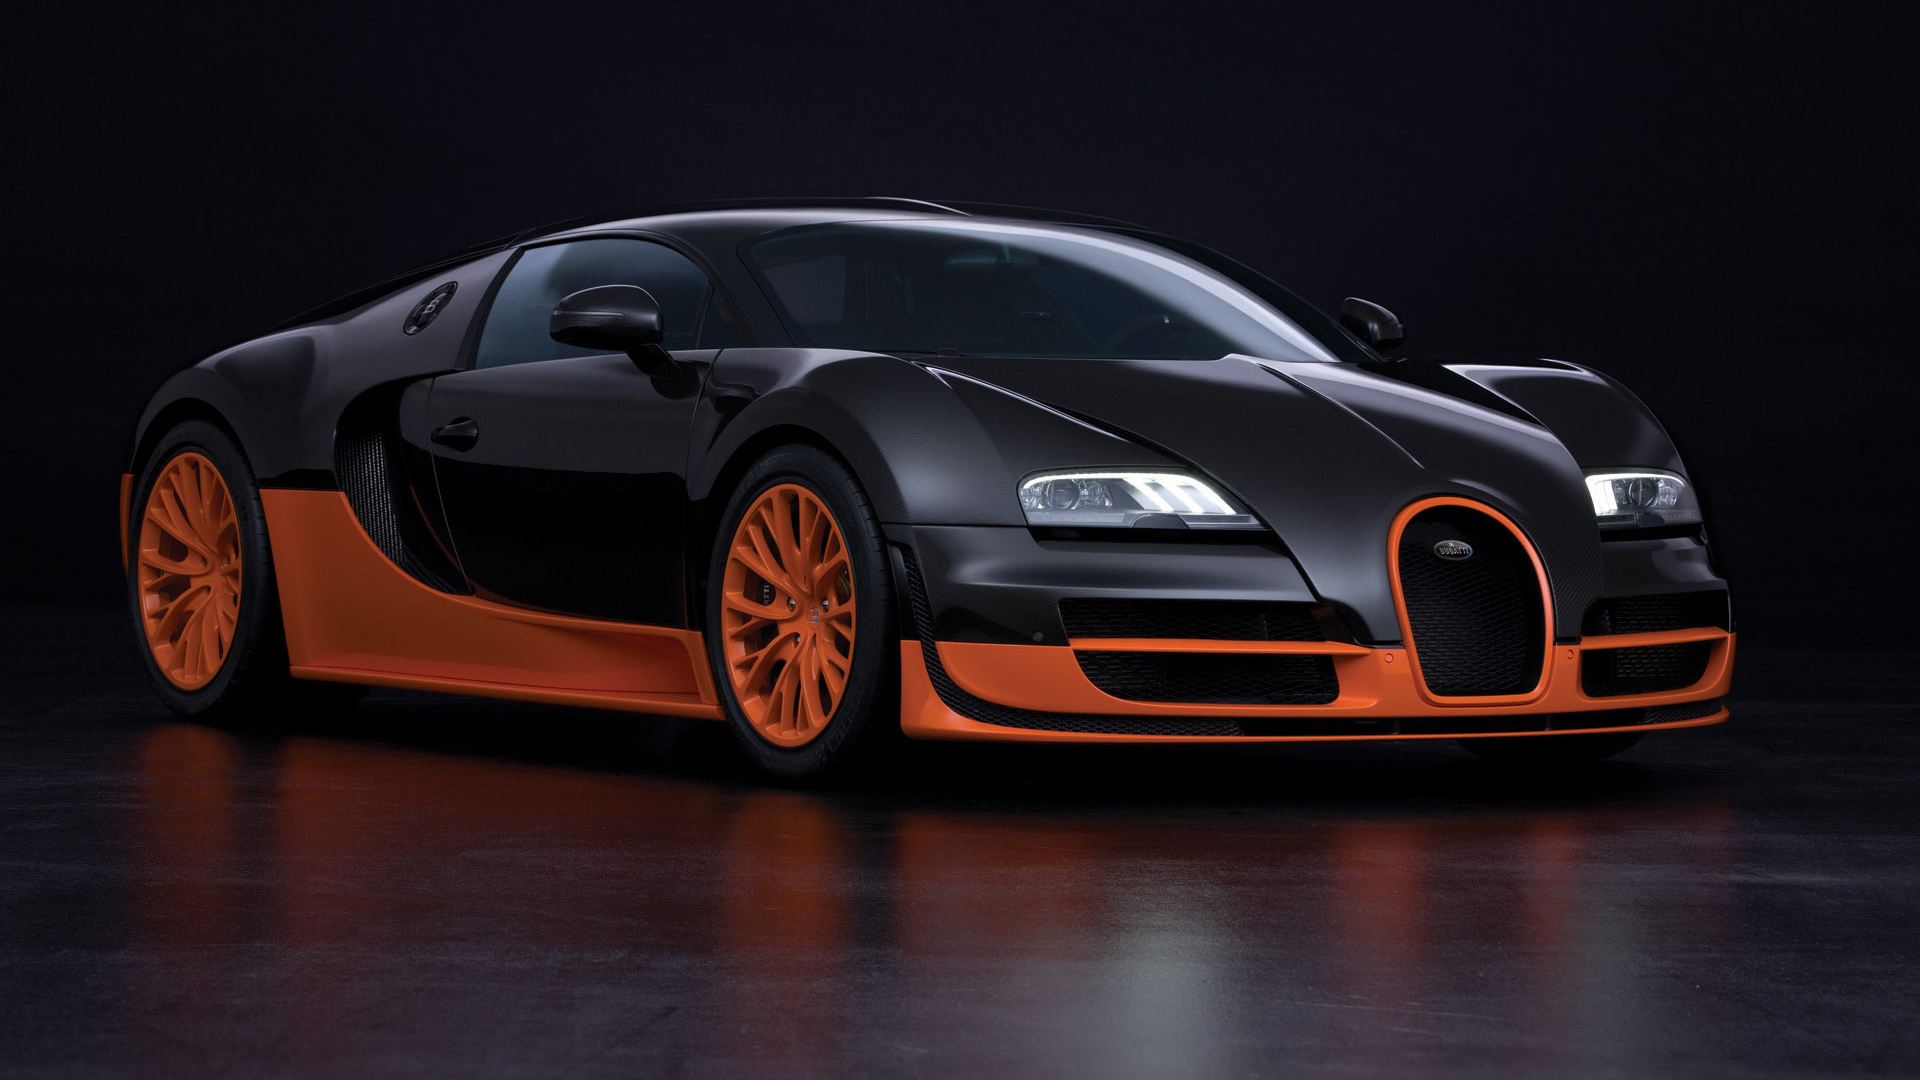 48 Bugatti Pictures And Wallpapers On Wallpapersafari